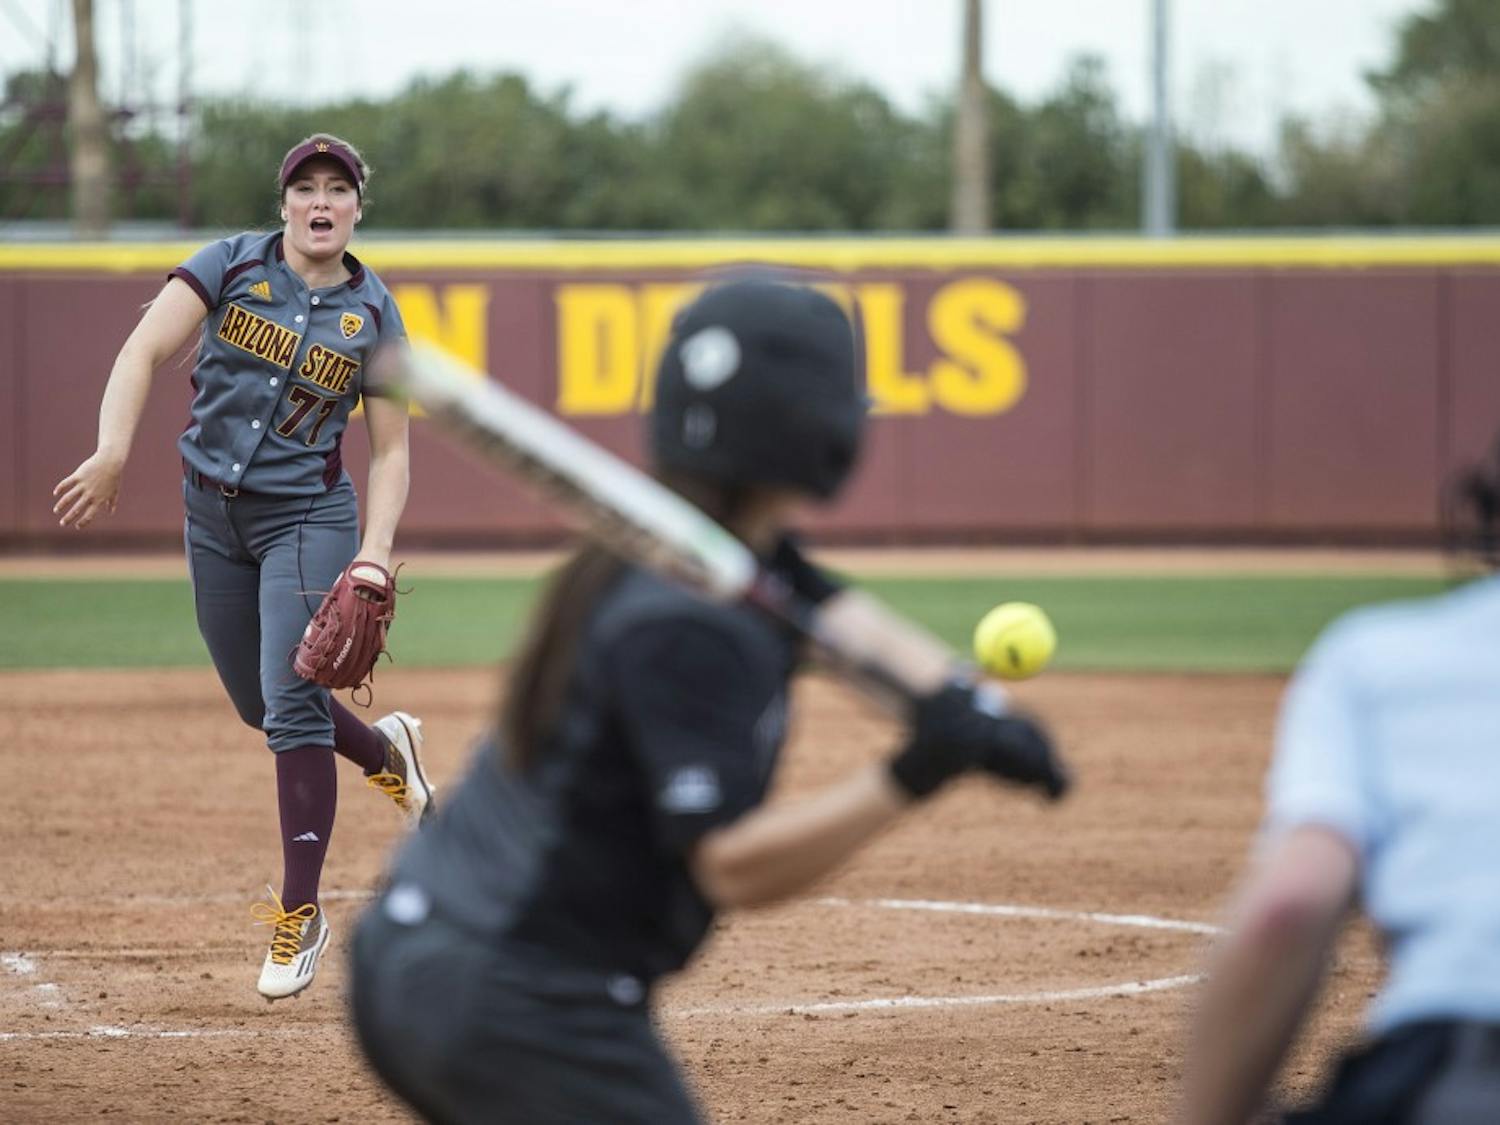 Sophomore pitcher Dale Ryndak pitches during a game against Portland State at Alberta B. Farrington Softball Stadium in Tempe, Arizona, on Sunday, Feb. 14, 2016. The Sun Devils won the game, 7-1.